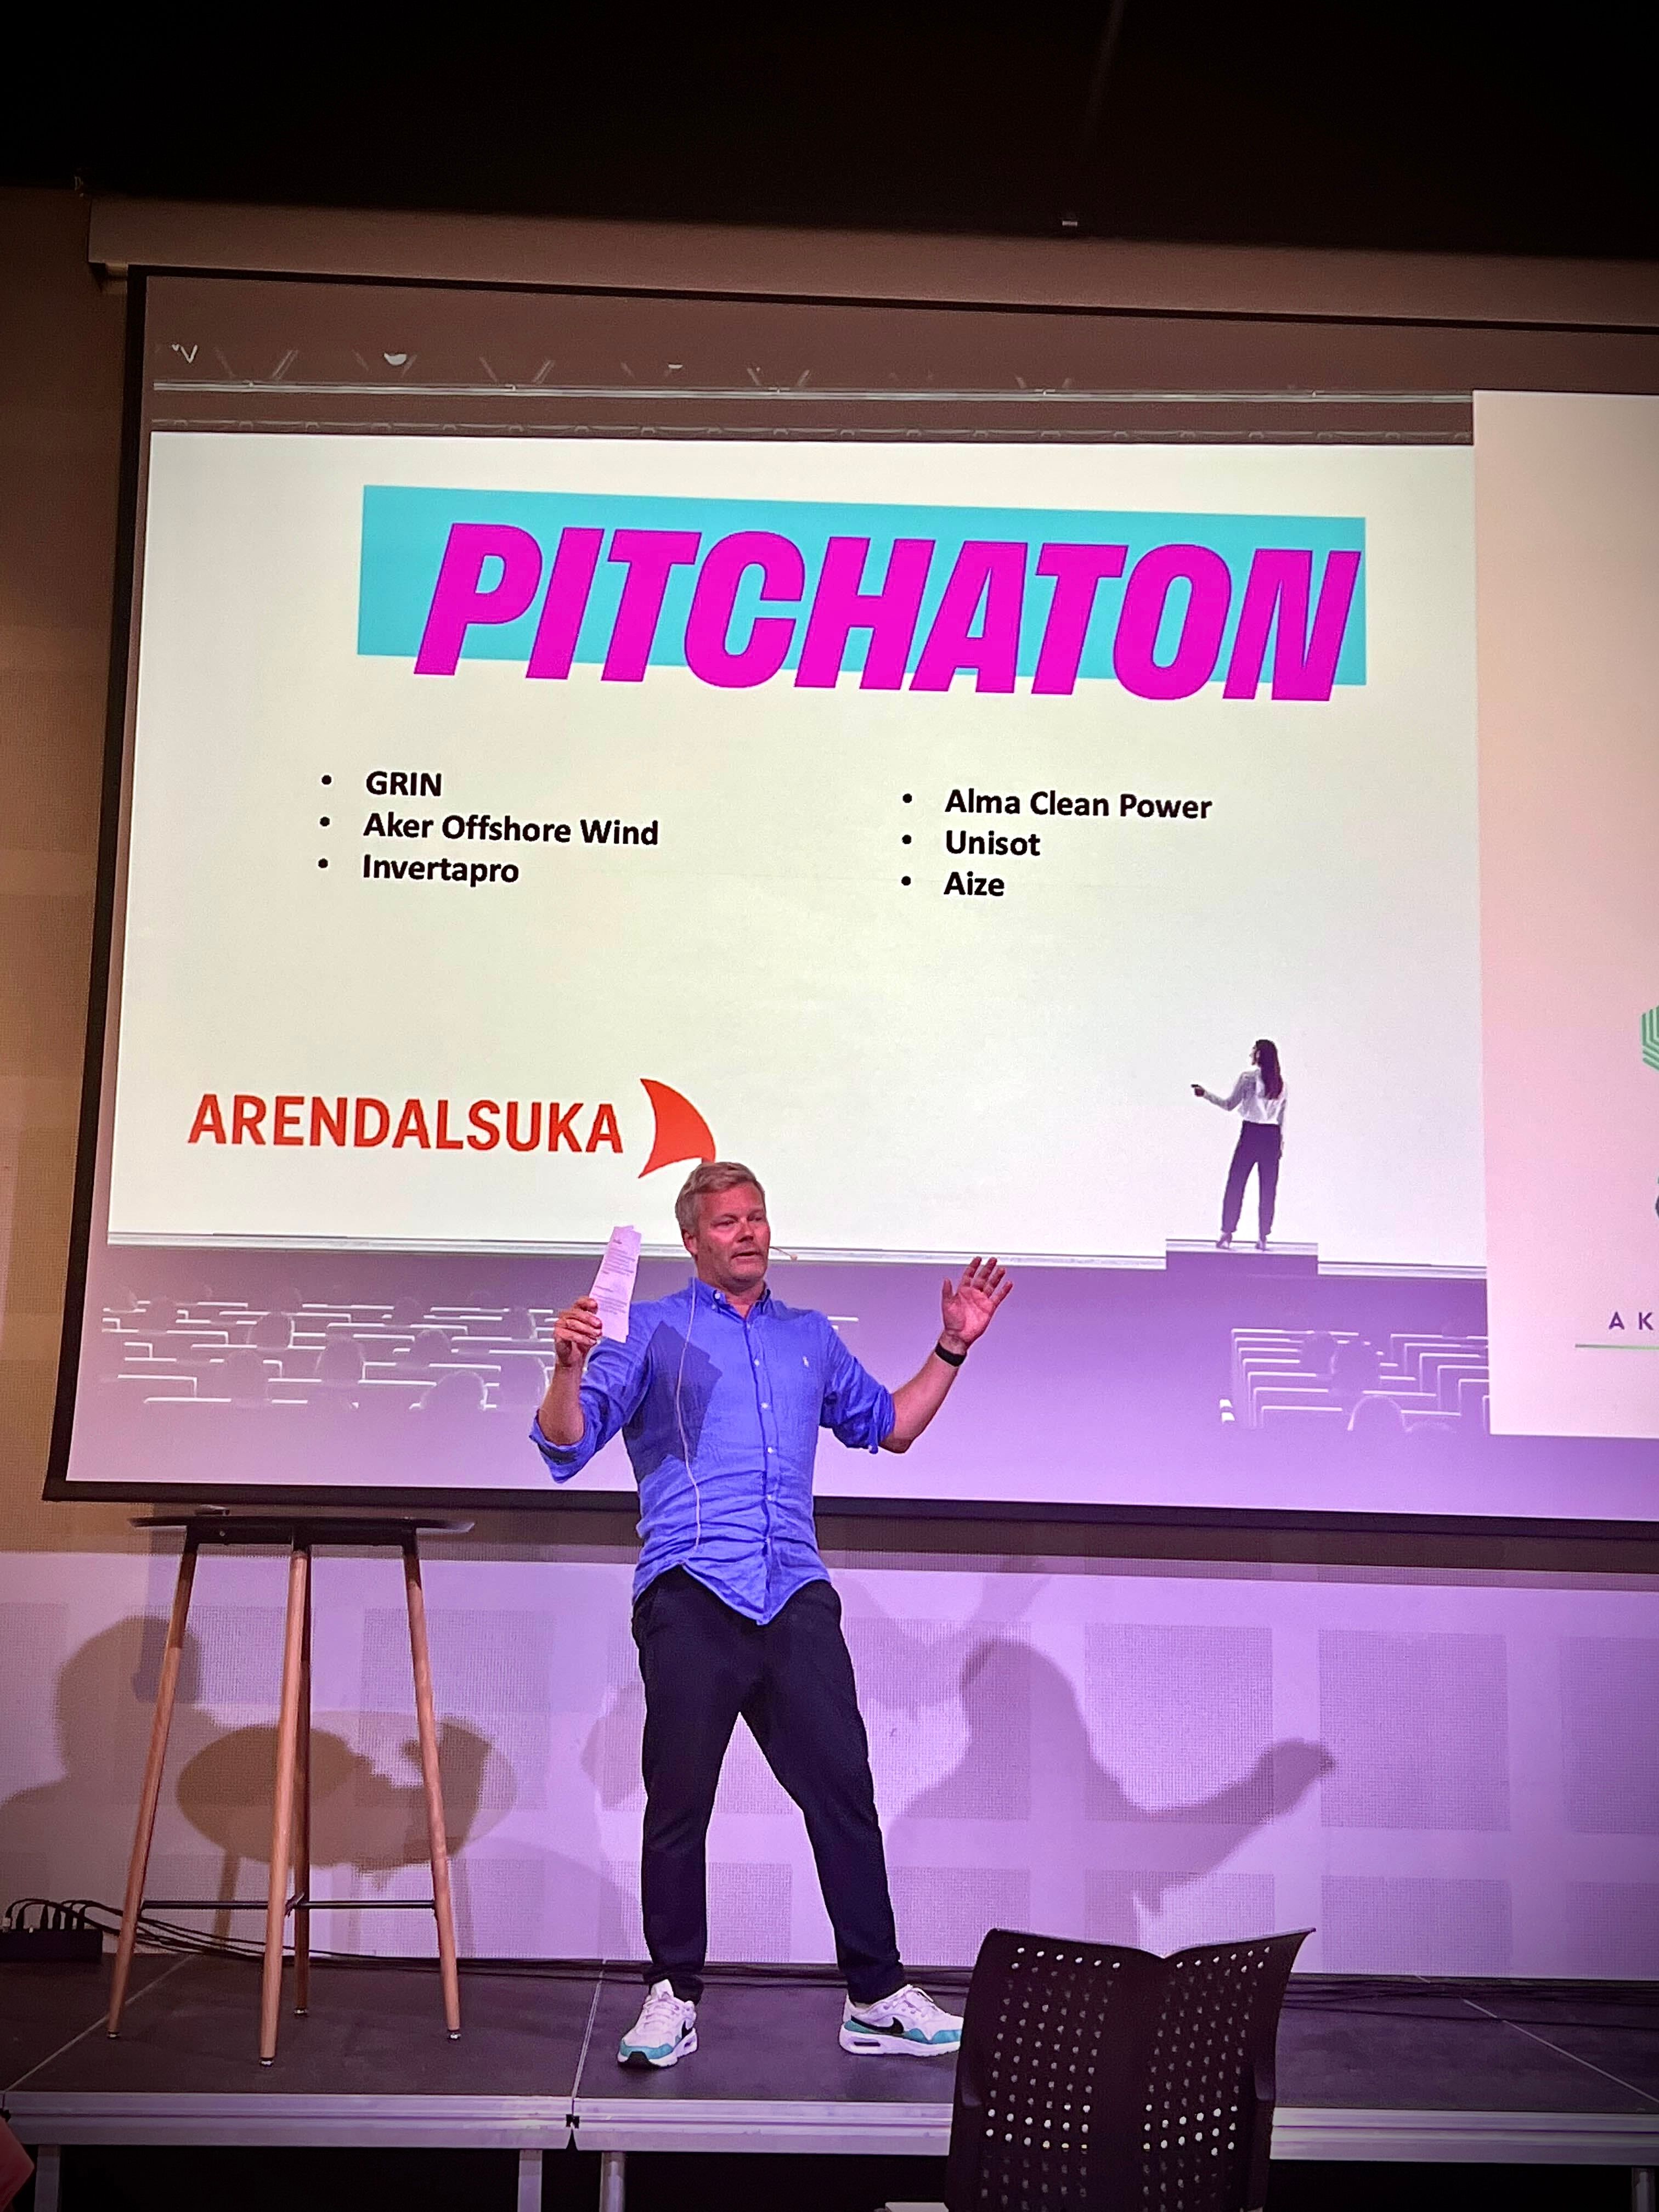 AION hosting Pitchaton at Arendalsuka